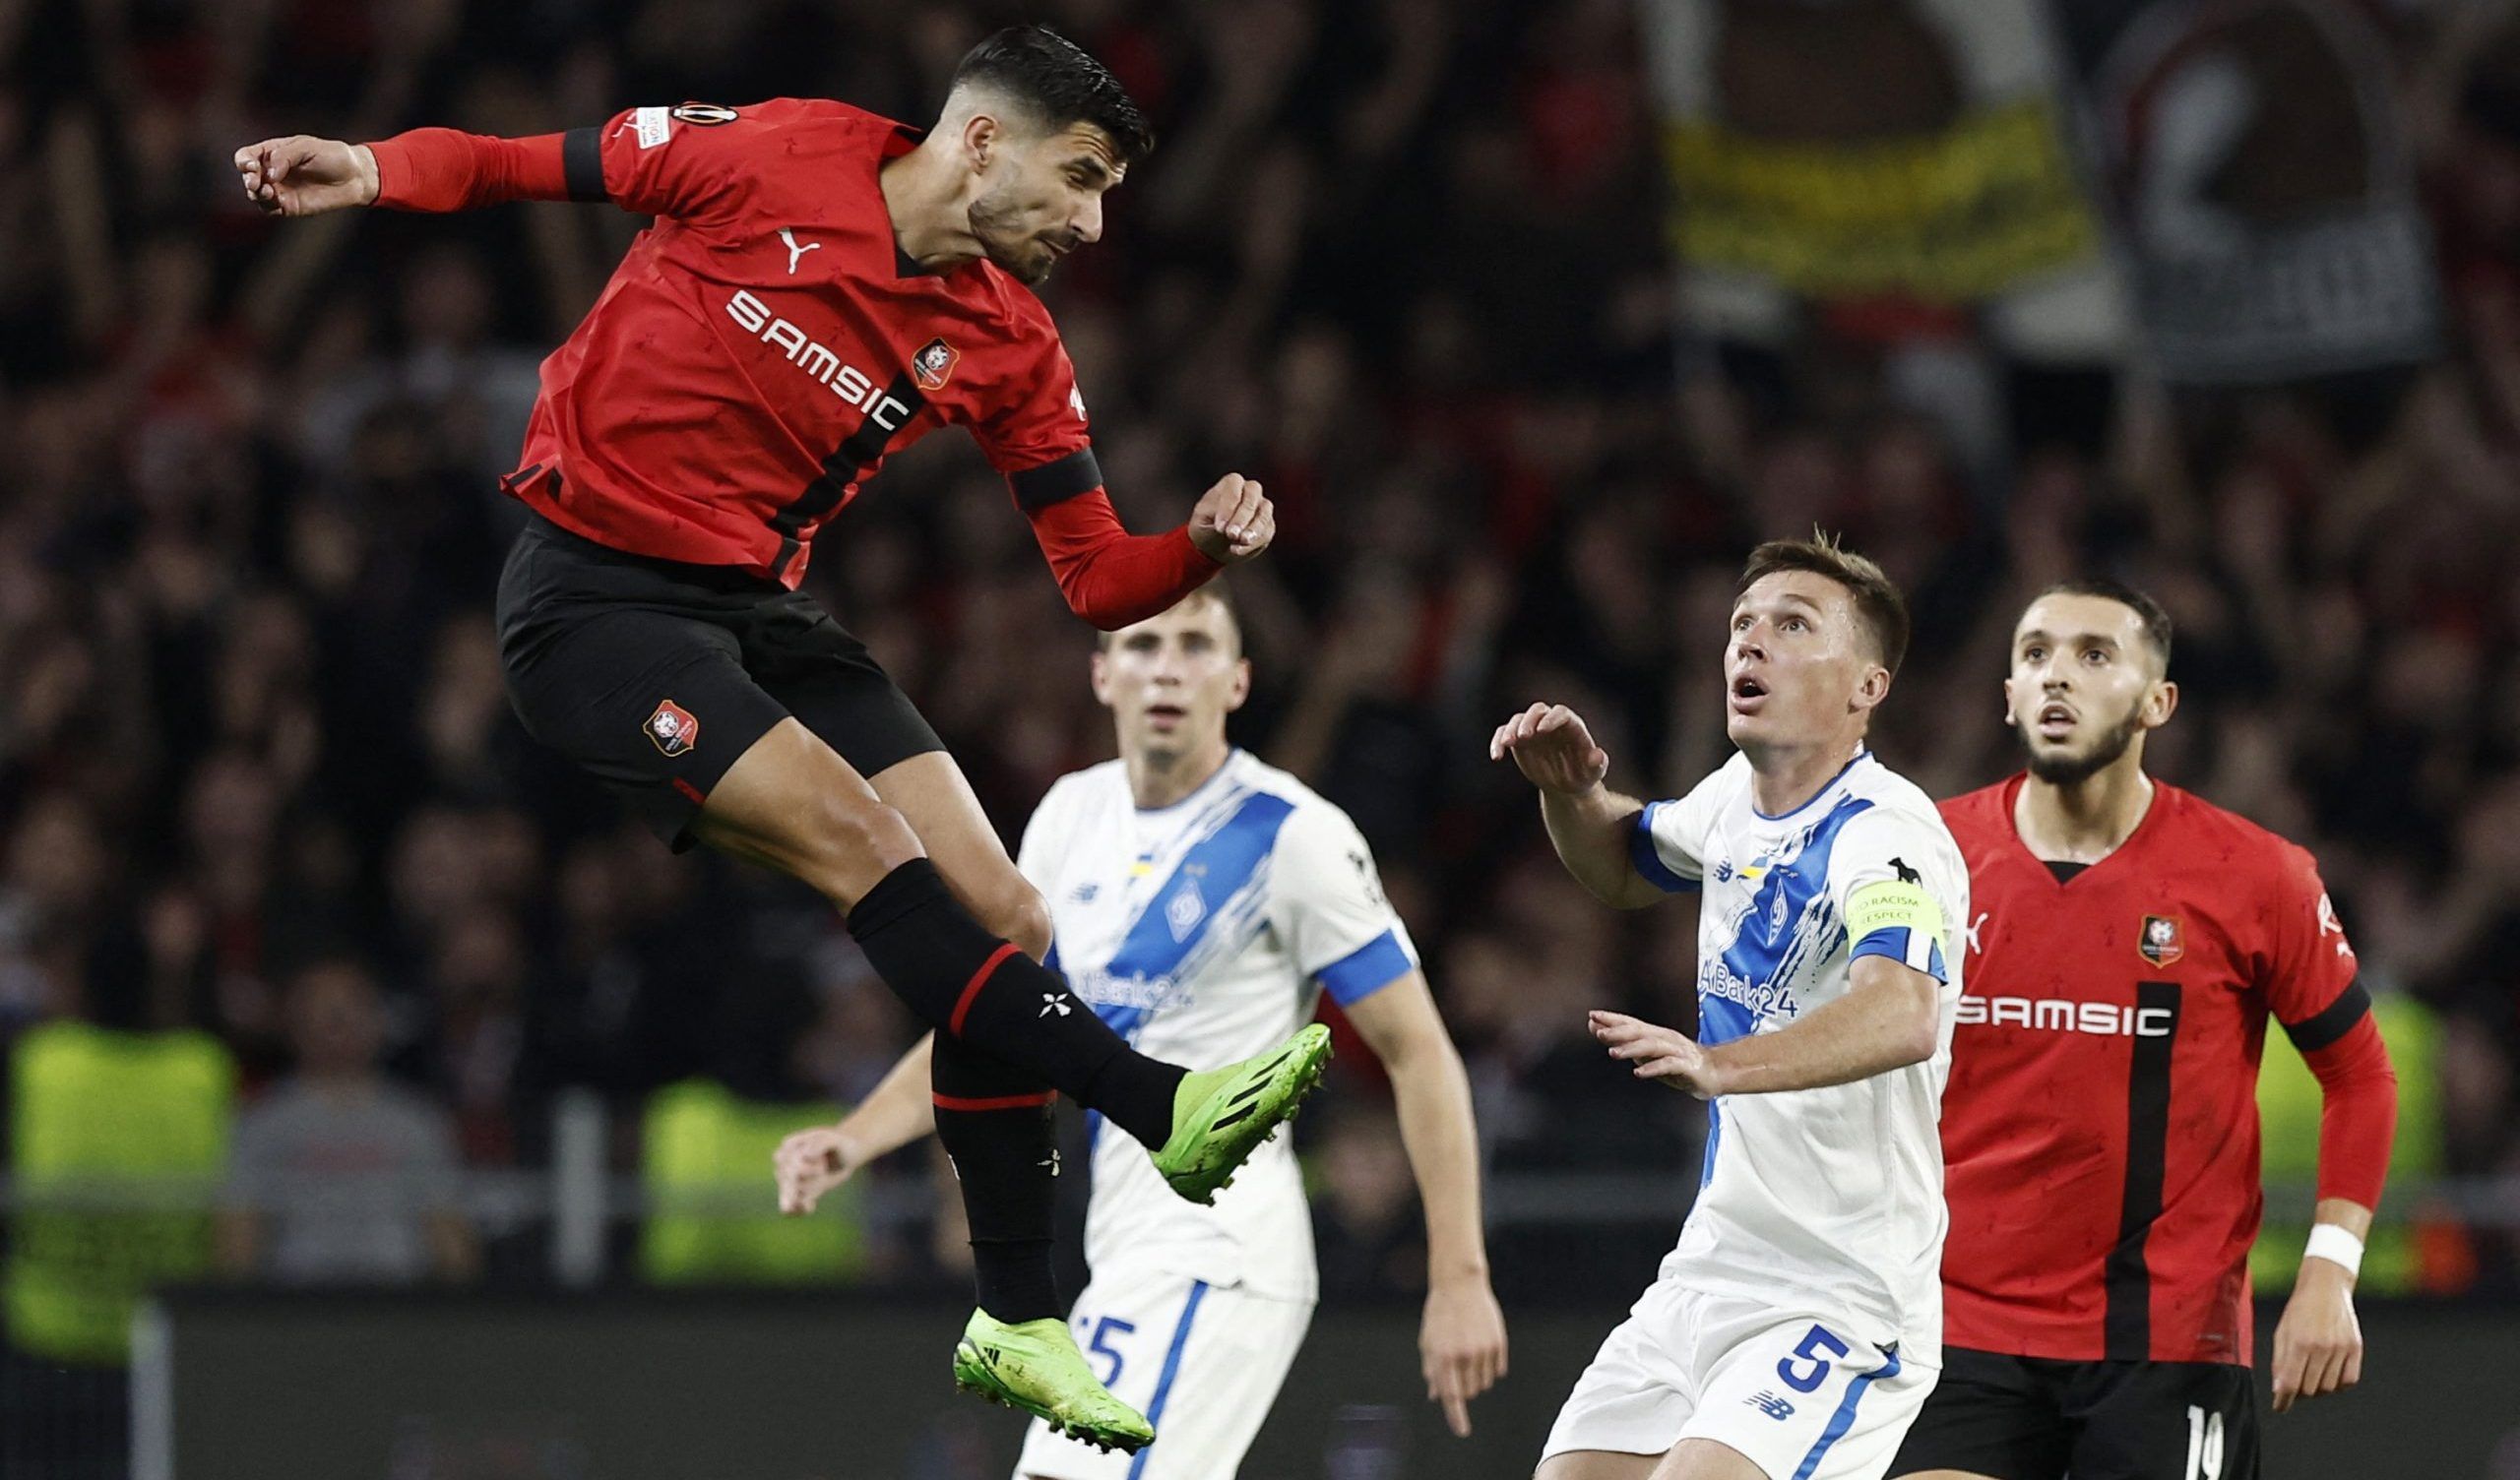 Soccer Football - Europa League - Group B - Stade Rennes v Dynamo Kyiv - Roazhon Park, Rennes, France - October 6, 2022 Stade Rennes' Martin Terrier in action with Dynamo Kyiv's Sergiy Sydorchuk REUTERS/Benoit Tessier